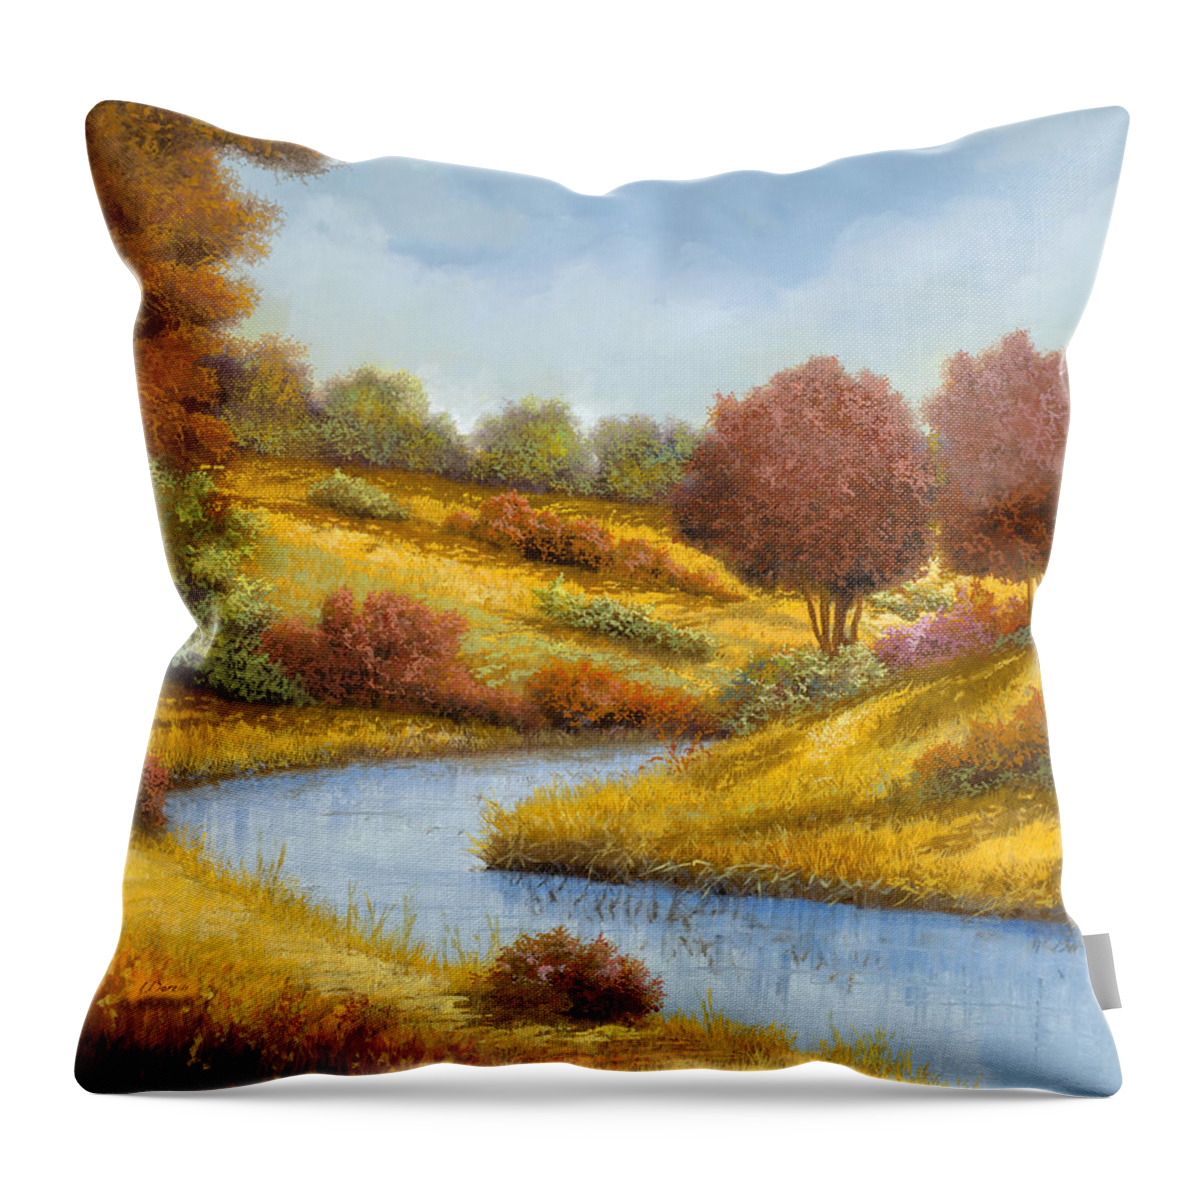 River Throw Pillow featuring the painting La Curva Del Fiume by Guido Borelli